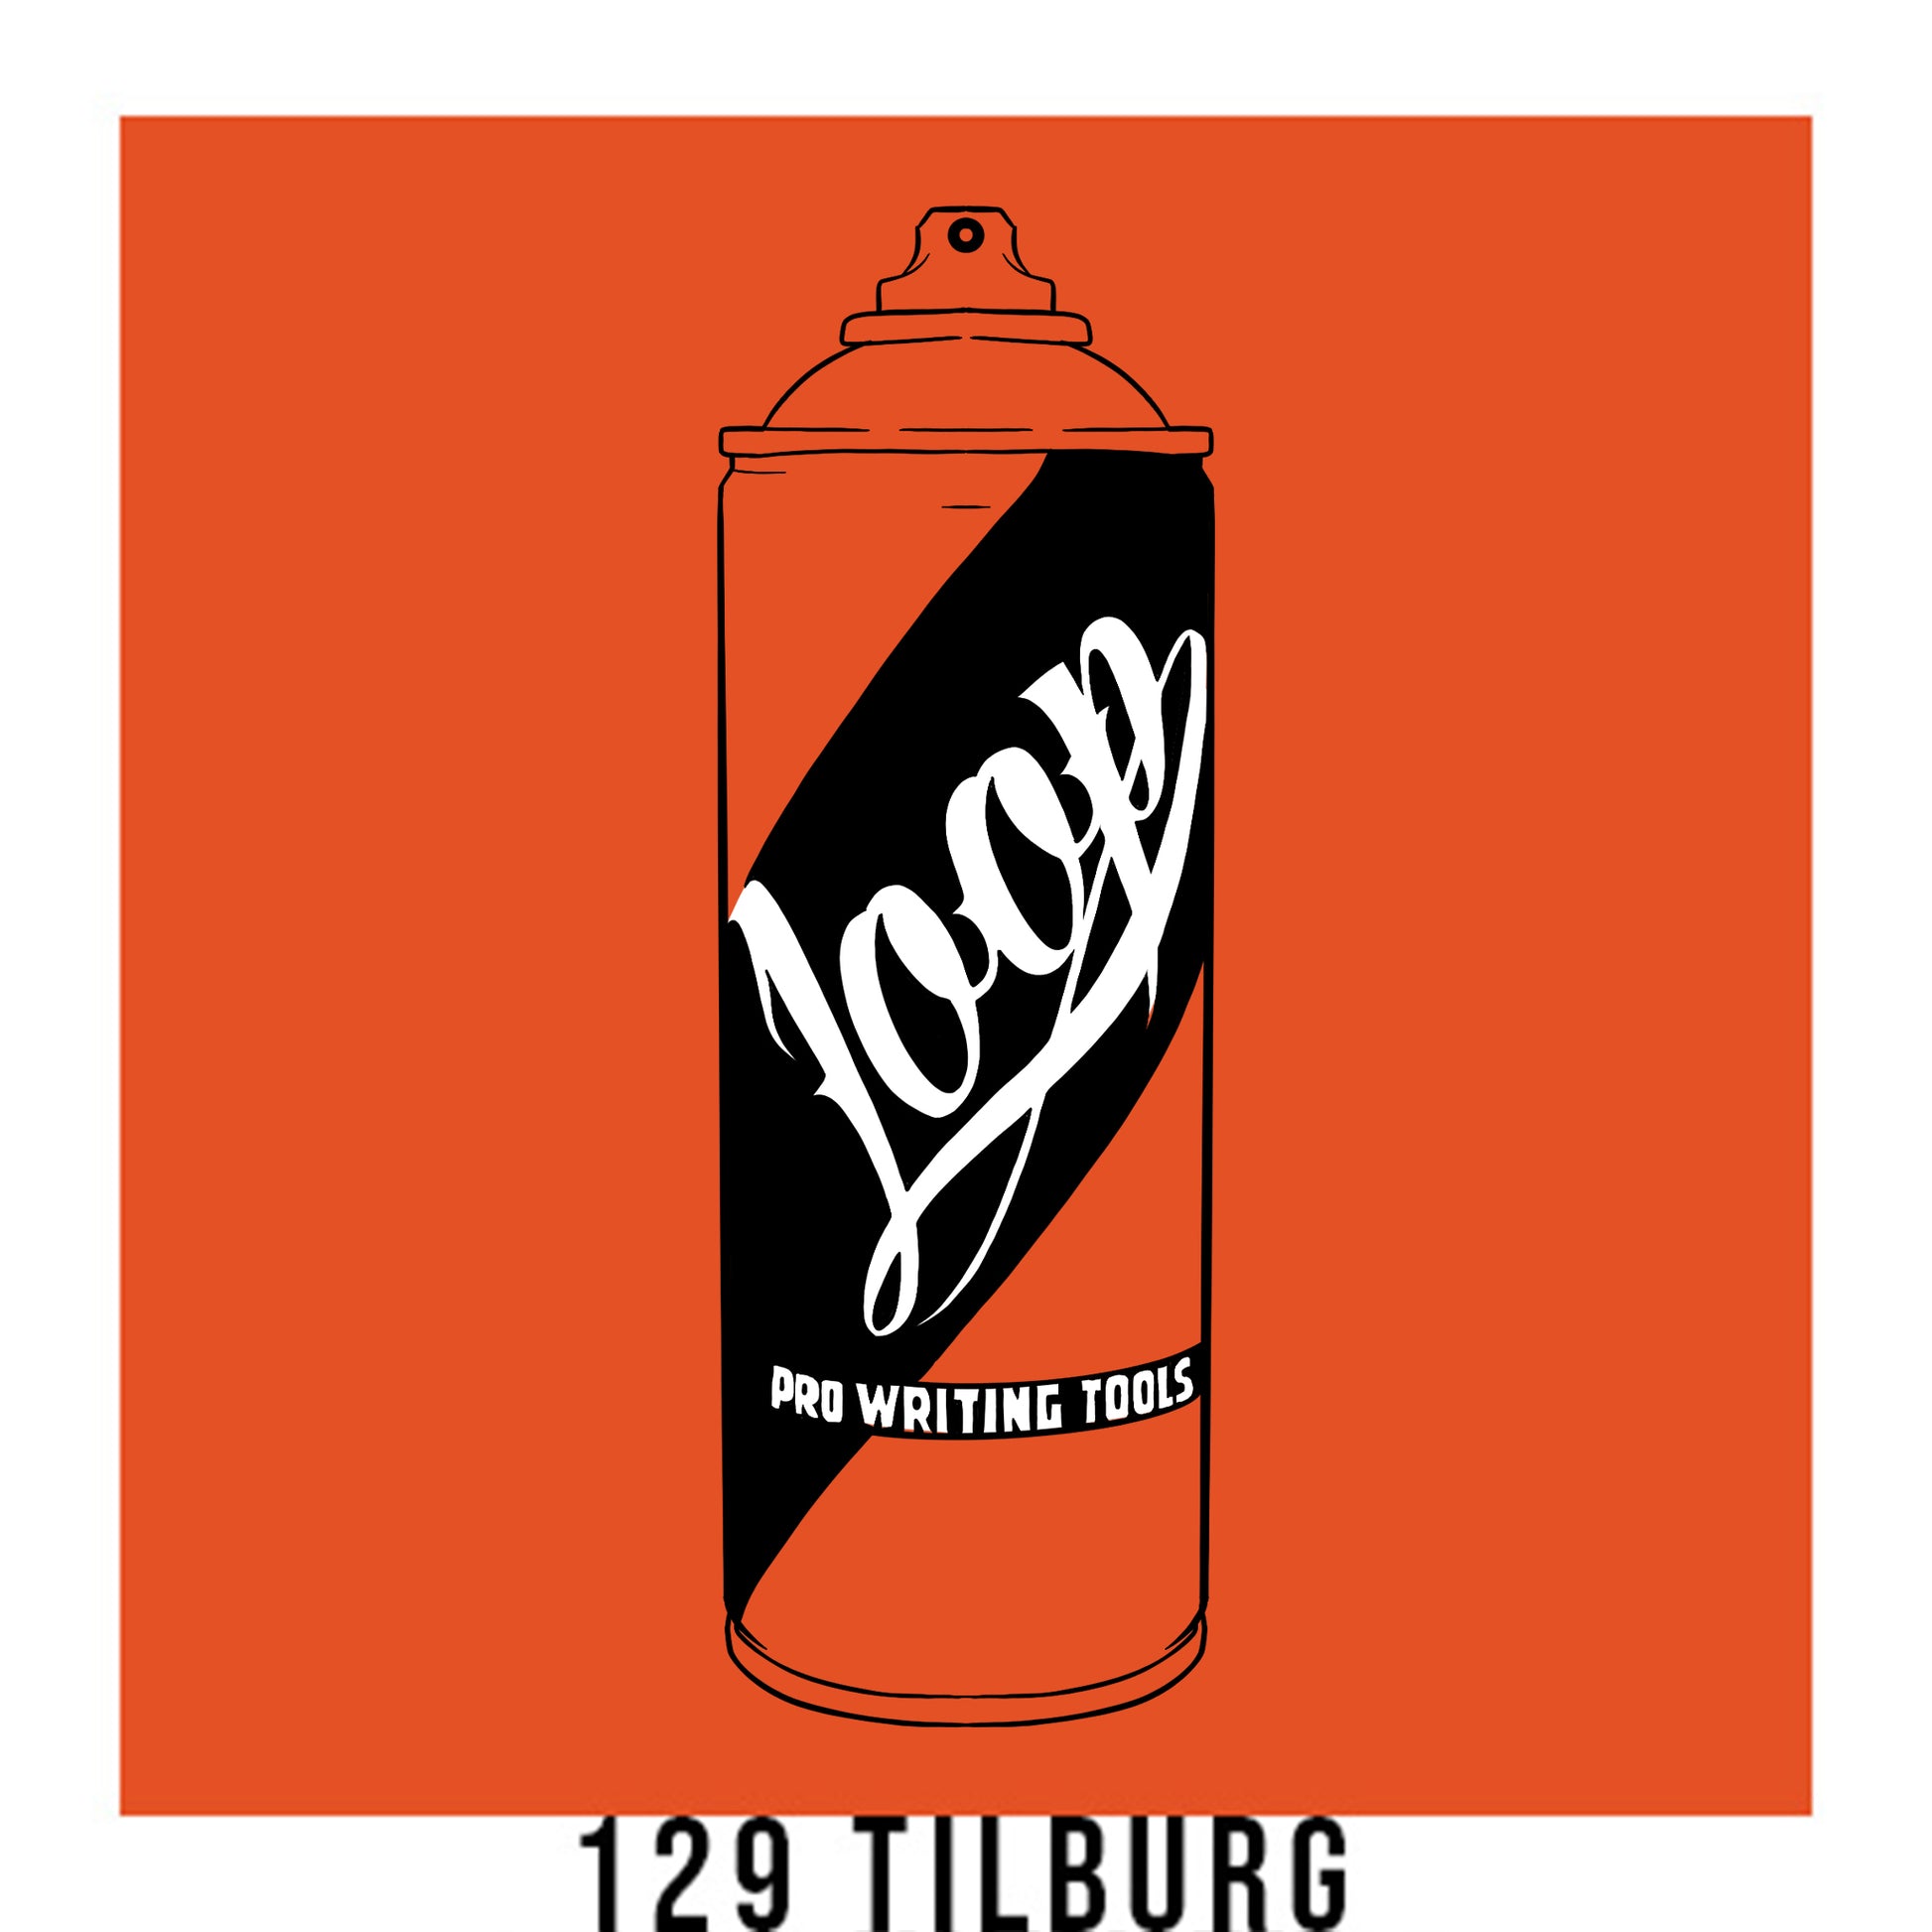 A black outline drawing of a dark orange spray paint can with the word "Loop" written on the face in script. The background is a color swatch of the same dark orange with a white border with the words "129 tilburg" at the bottom.